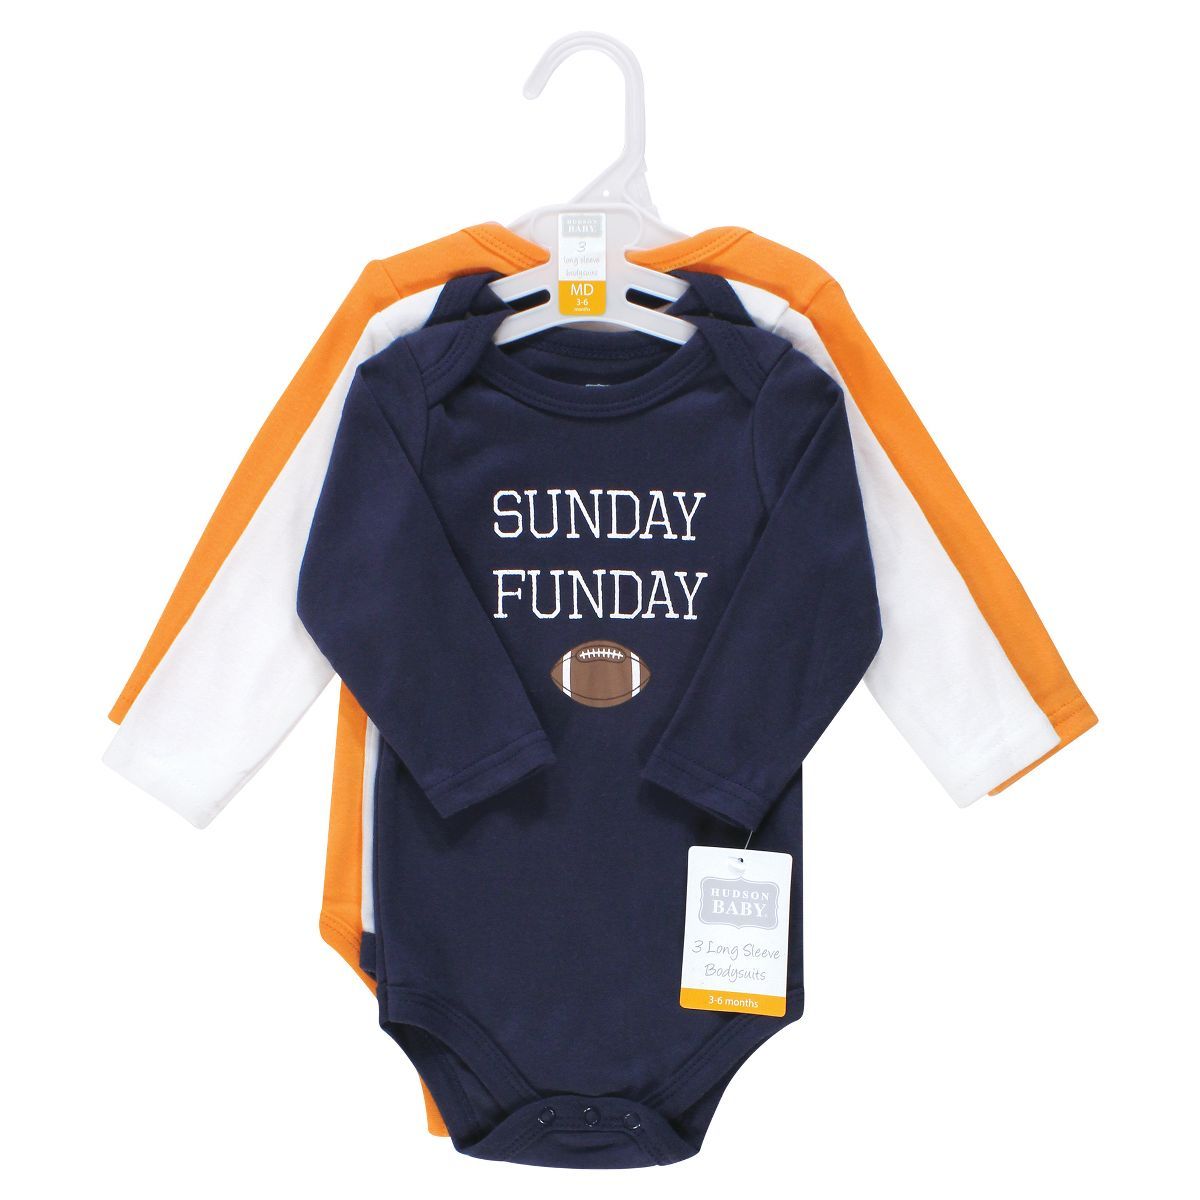 Hudson Baby Unisex Baby Cotton Long-Sleeve Bodysuits, Fall Winter Sports | Target